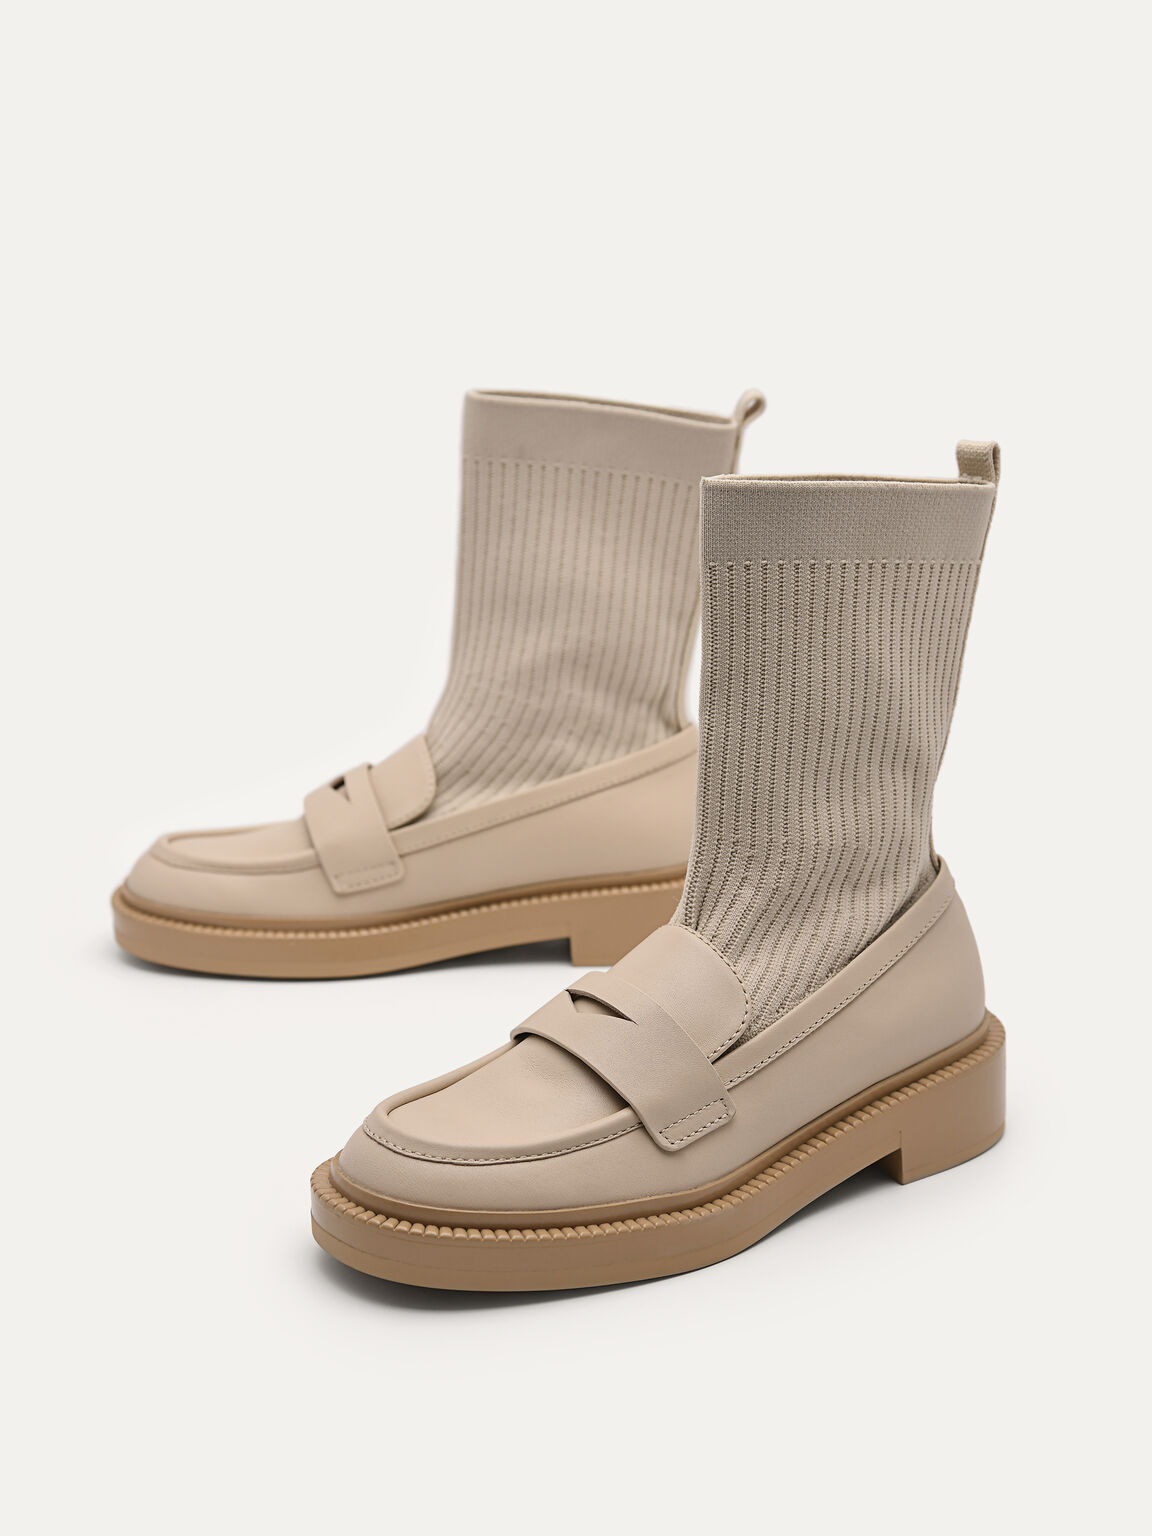 Leather Gropius Boots, Sand